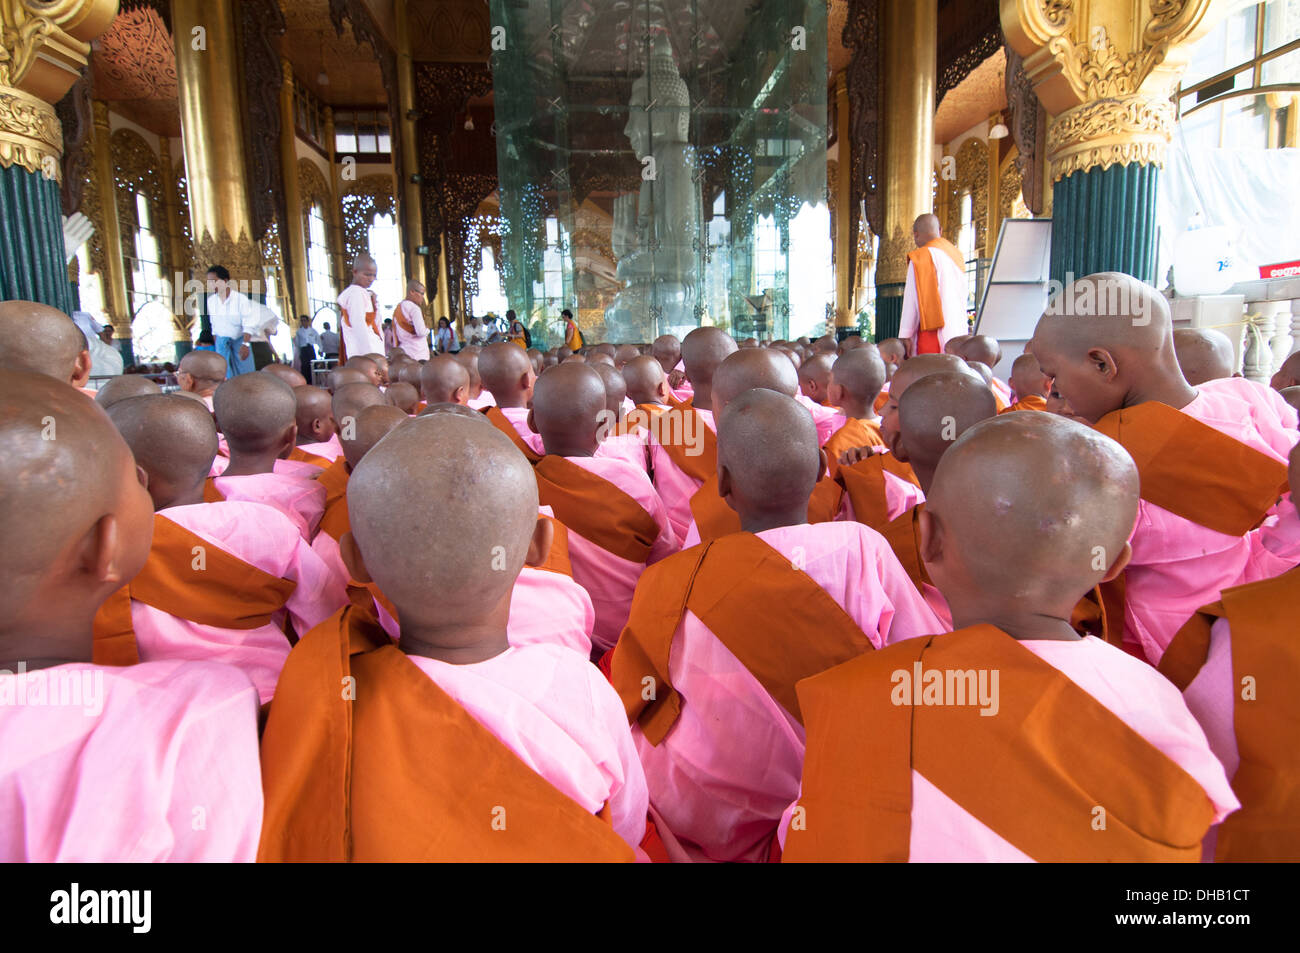 A sea of balled heads. young Buddhist nuns in a religious gathering by the white marble Buddha at the Kyauk Daw Kyi Pagoda. Stock Photo